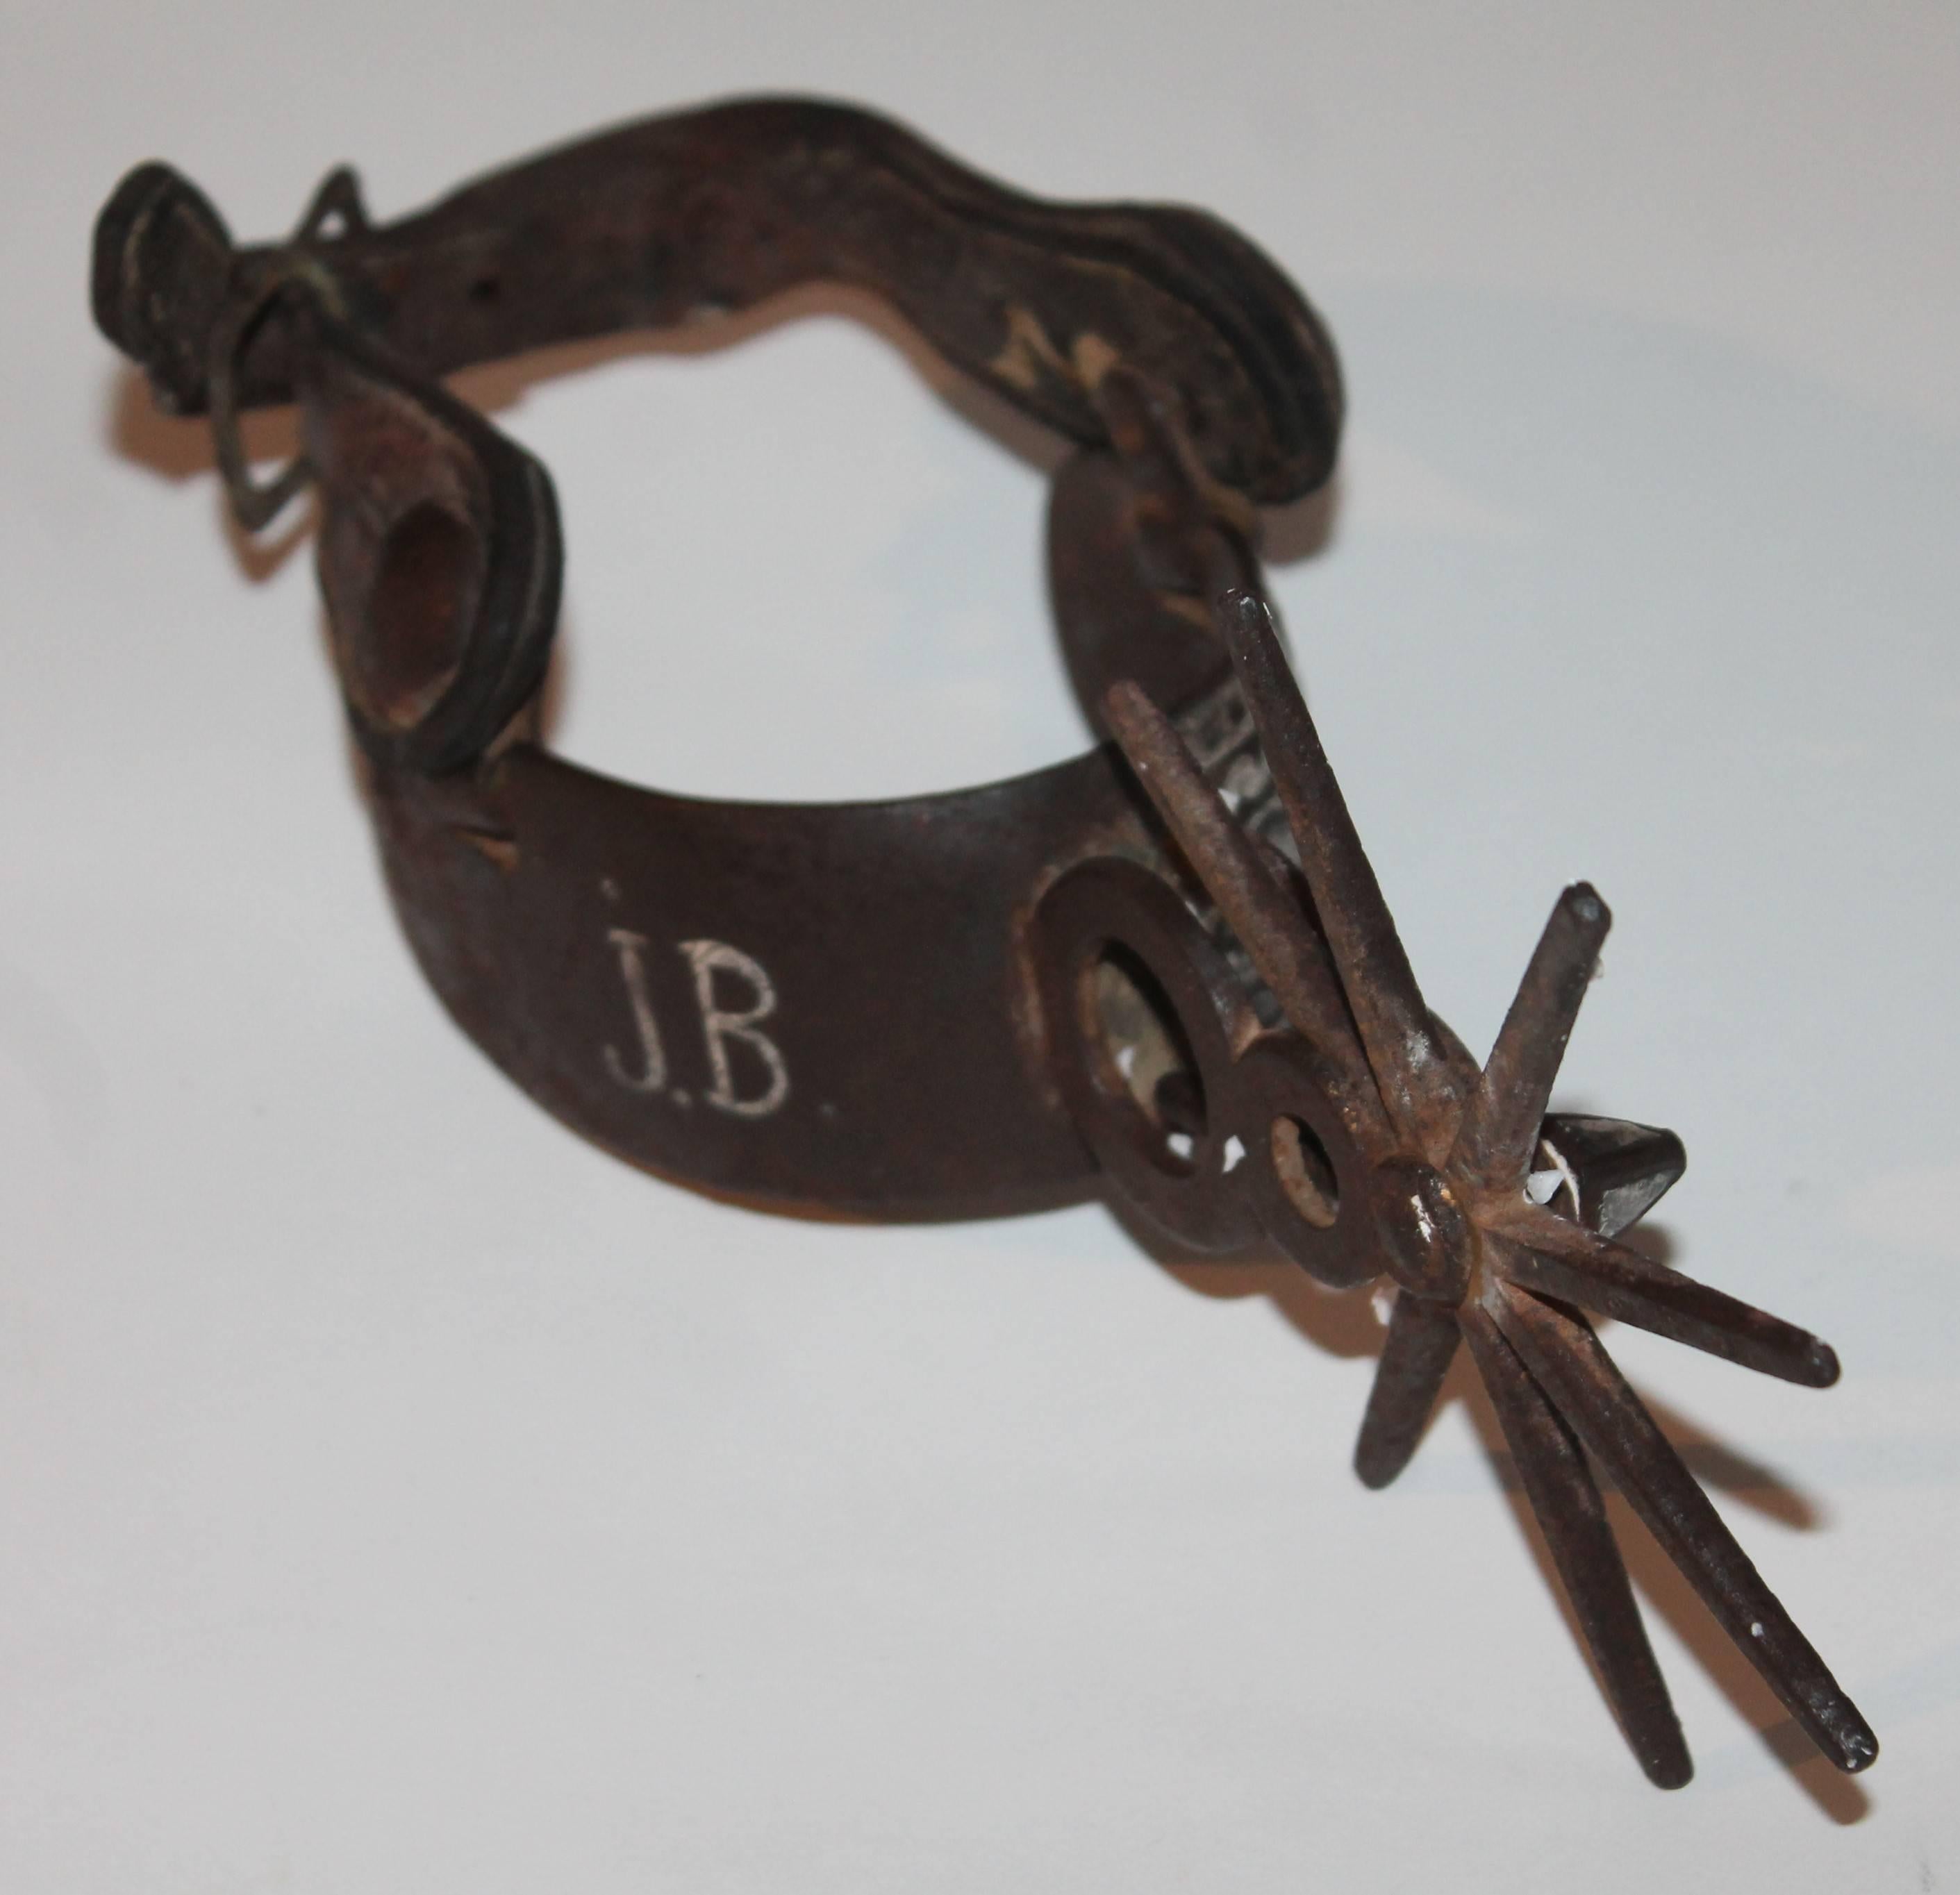 Hand-Crafted 19th Century Cowboys Stirrup Signed J.B. in Silver Inlay in Iron